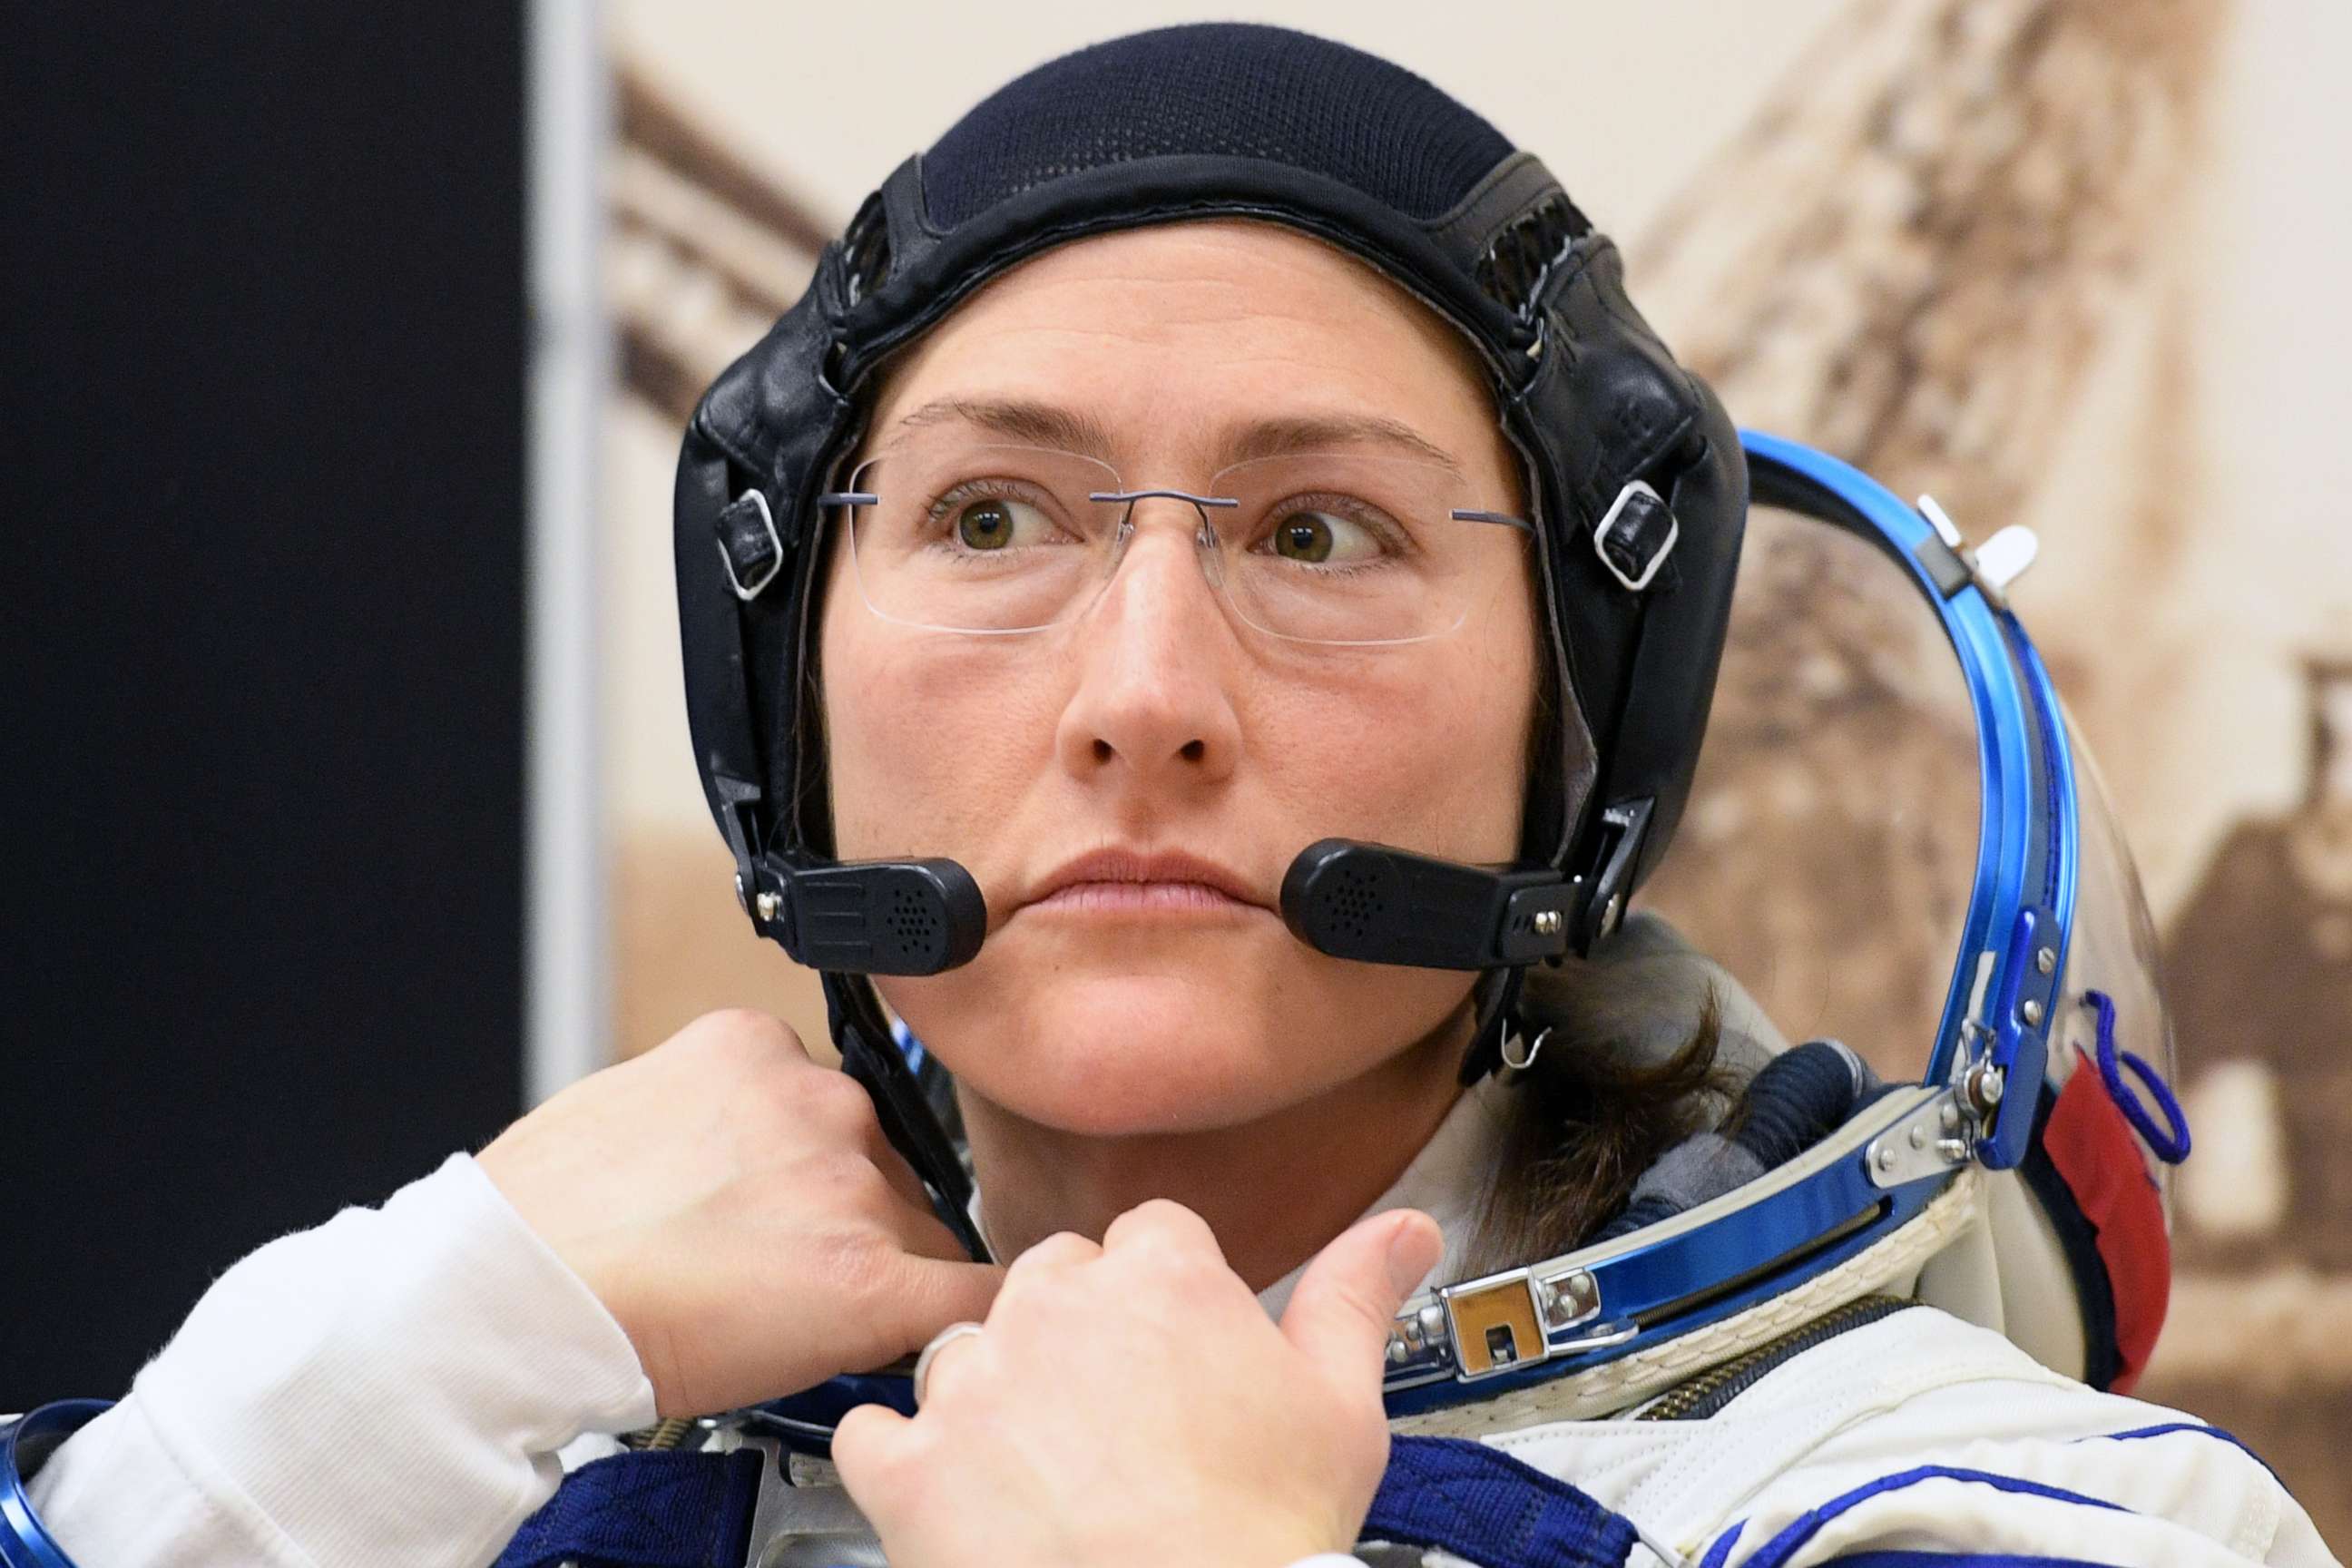 PHOTO: NASA astronaut Christina Hammock Koch, a member of the International Space Station expedition 59/60, looks on as her spacesuit is tested prior to launch from the Russian-leased Baikonur cosmodrome in Kazakhstan, March 14, 2019.